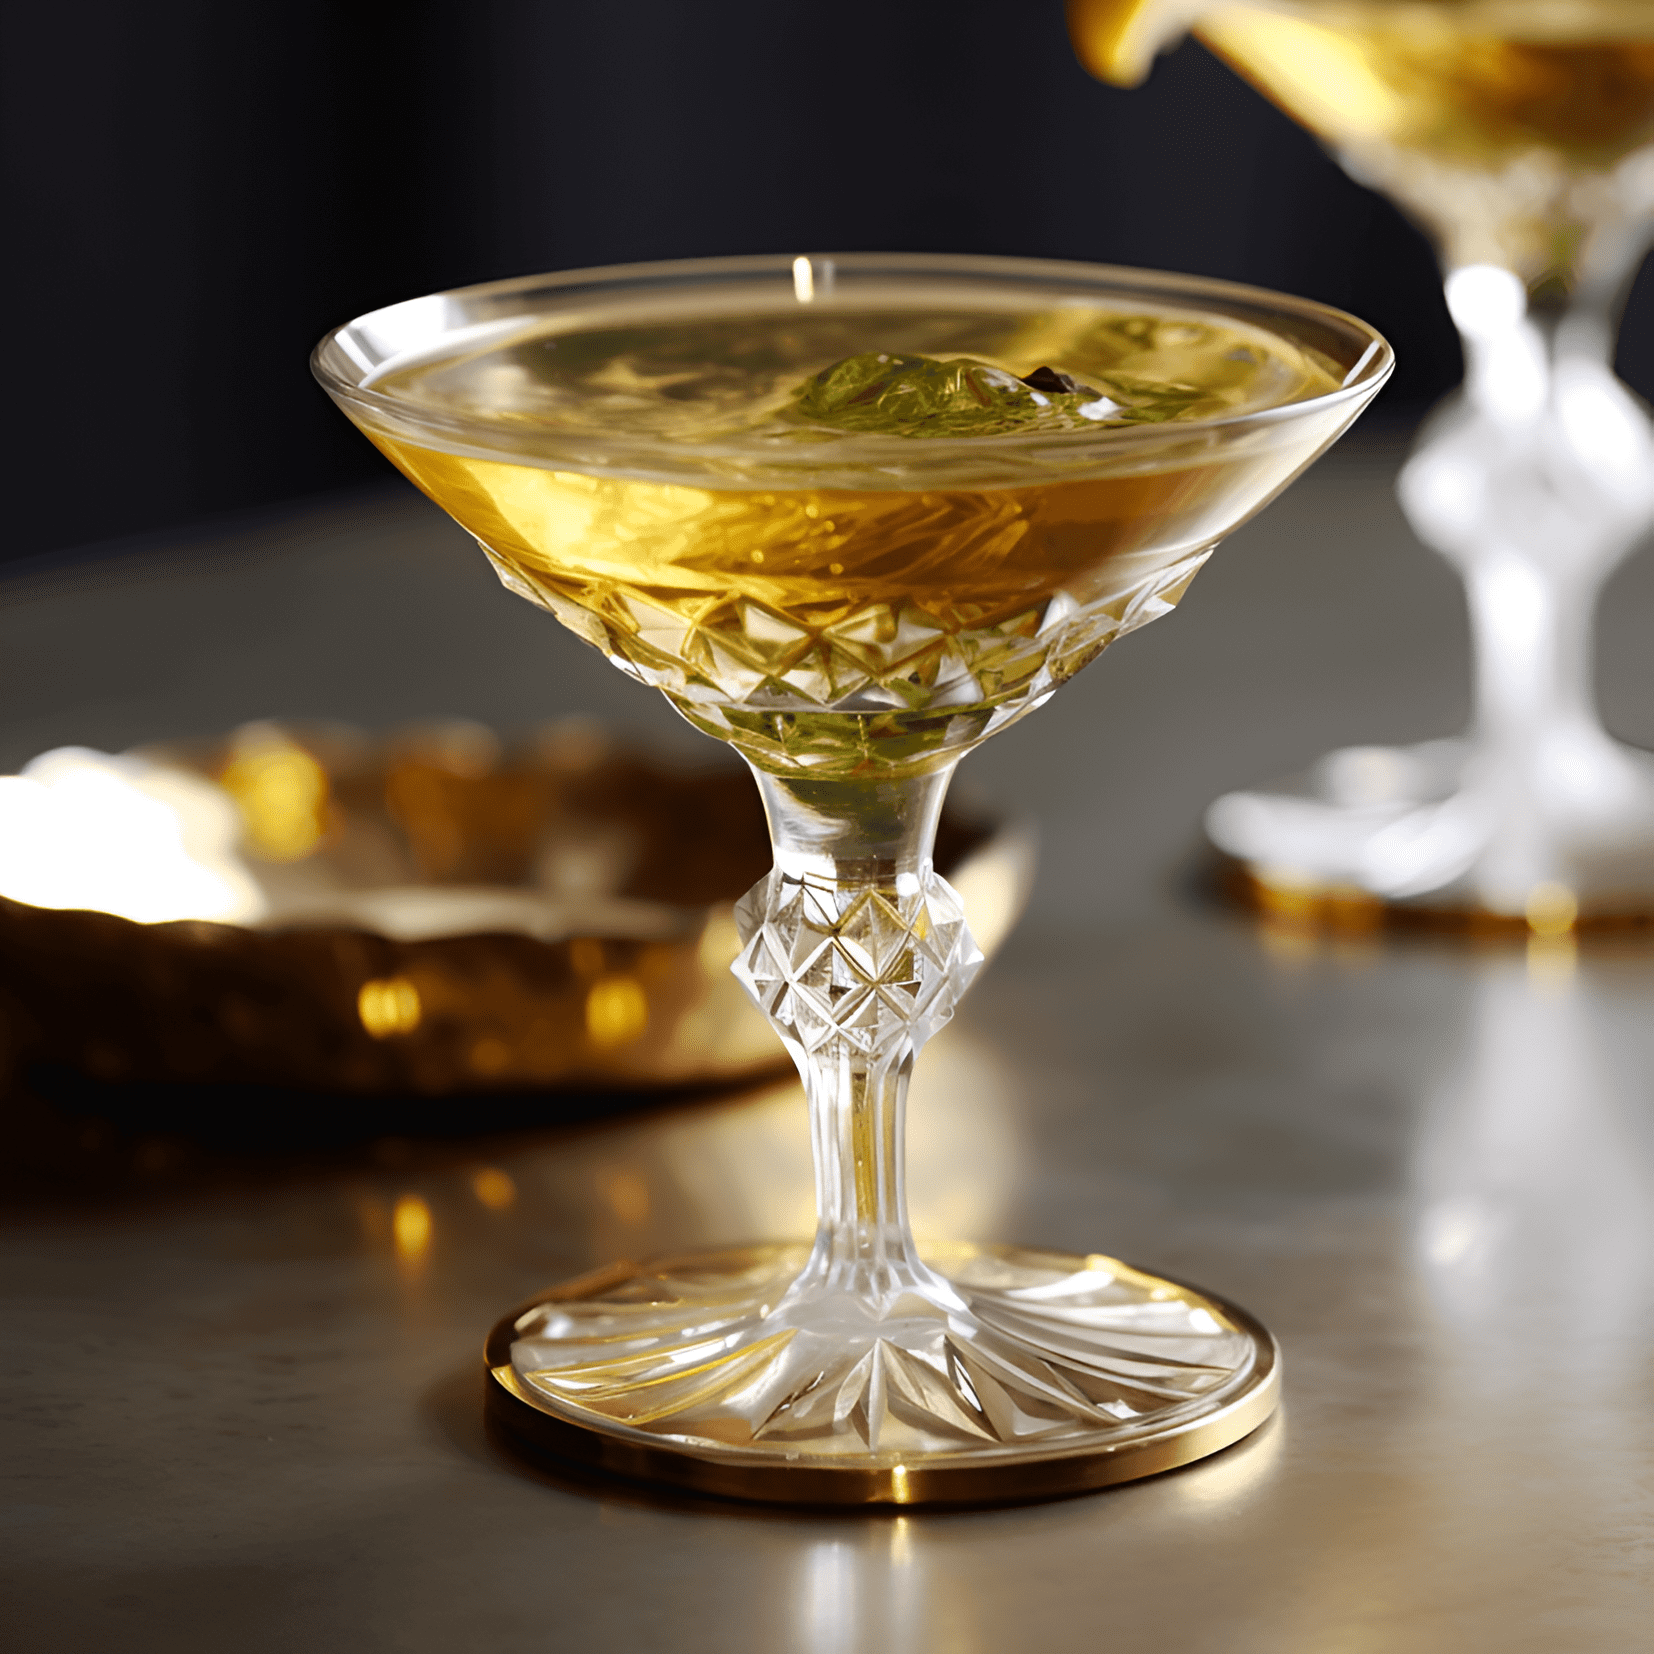 Bijou Cocktail Recipe - The Bijou cocktail has a complex and well-balanced taste, featuring herbal and botanical notes from the gin and green Chartreuse, sweetness from the sweet vermouth, and a hint of bitterness from the orange bitters. It is a strong, rich, and slightly sweet drink with a smooth and velvety texture.